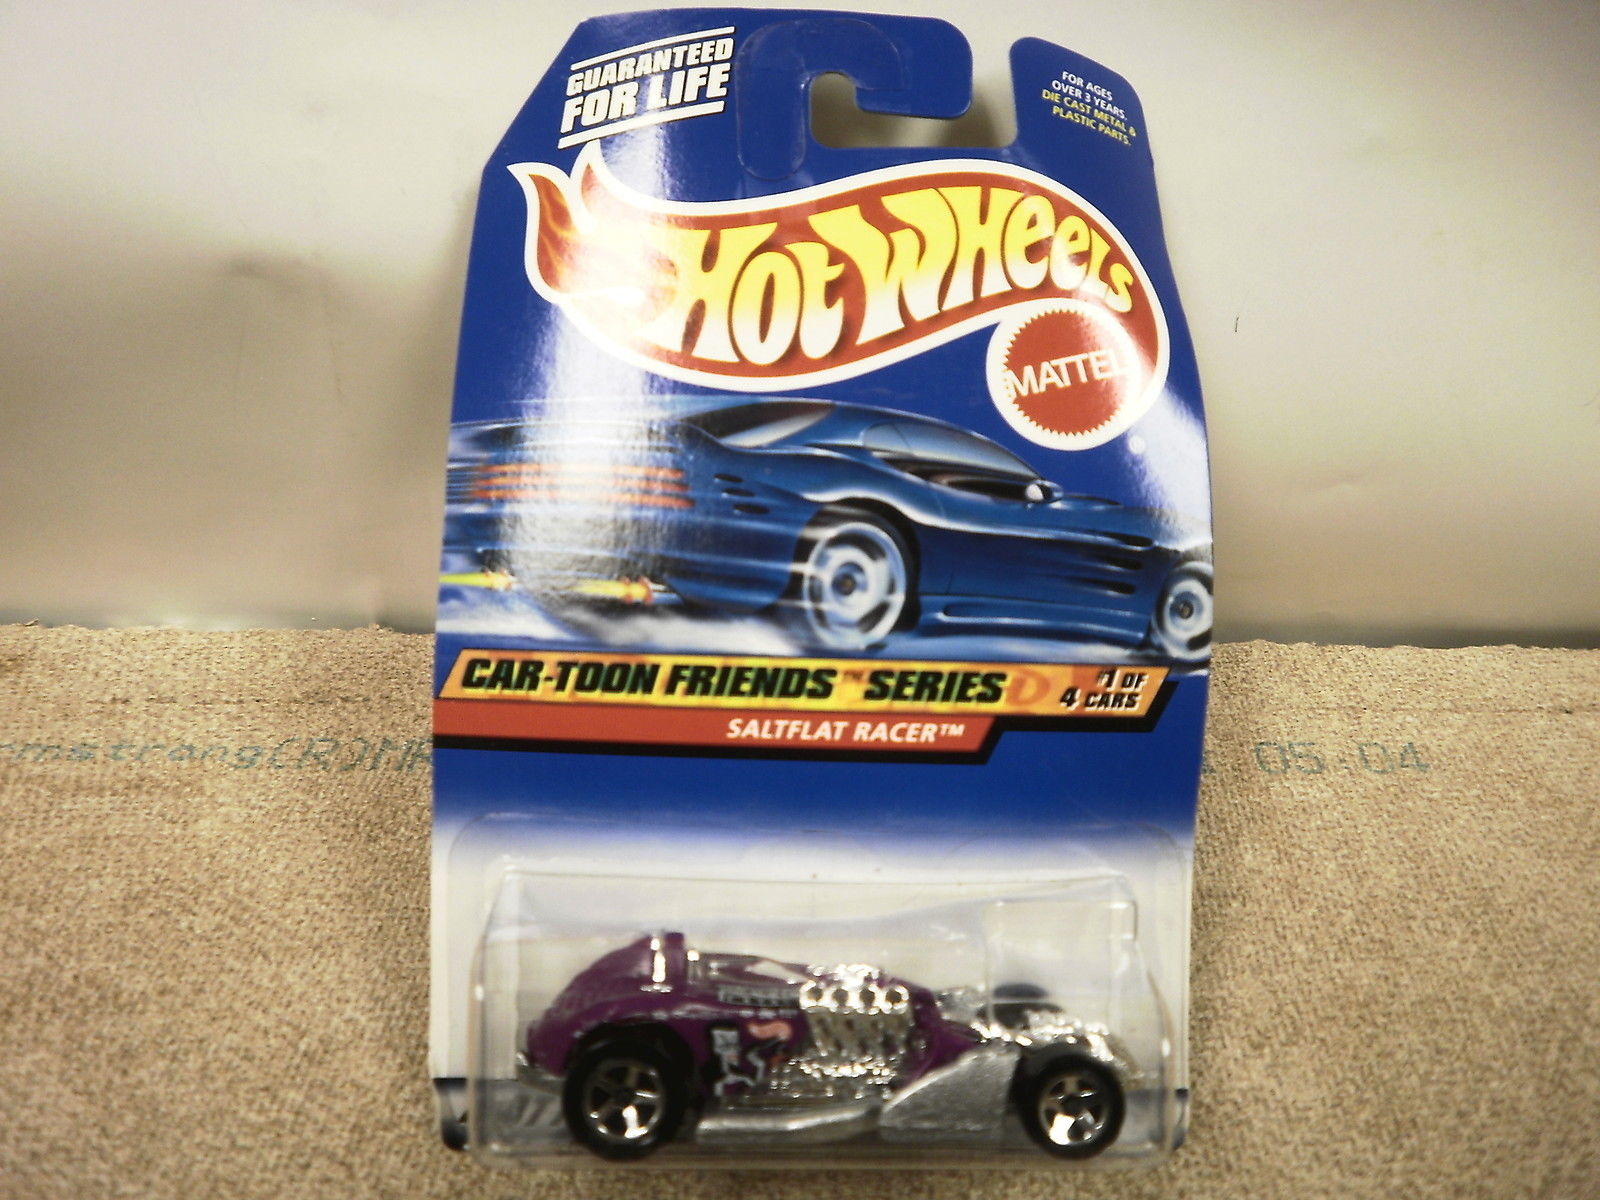 Primary image for L37 MATTEL HOT WHEELS 21333 SALTFLAT RACER CAR-TOON FRIENDS SERIES NEW ON CARD